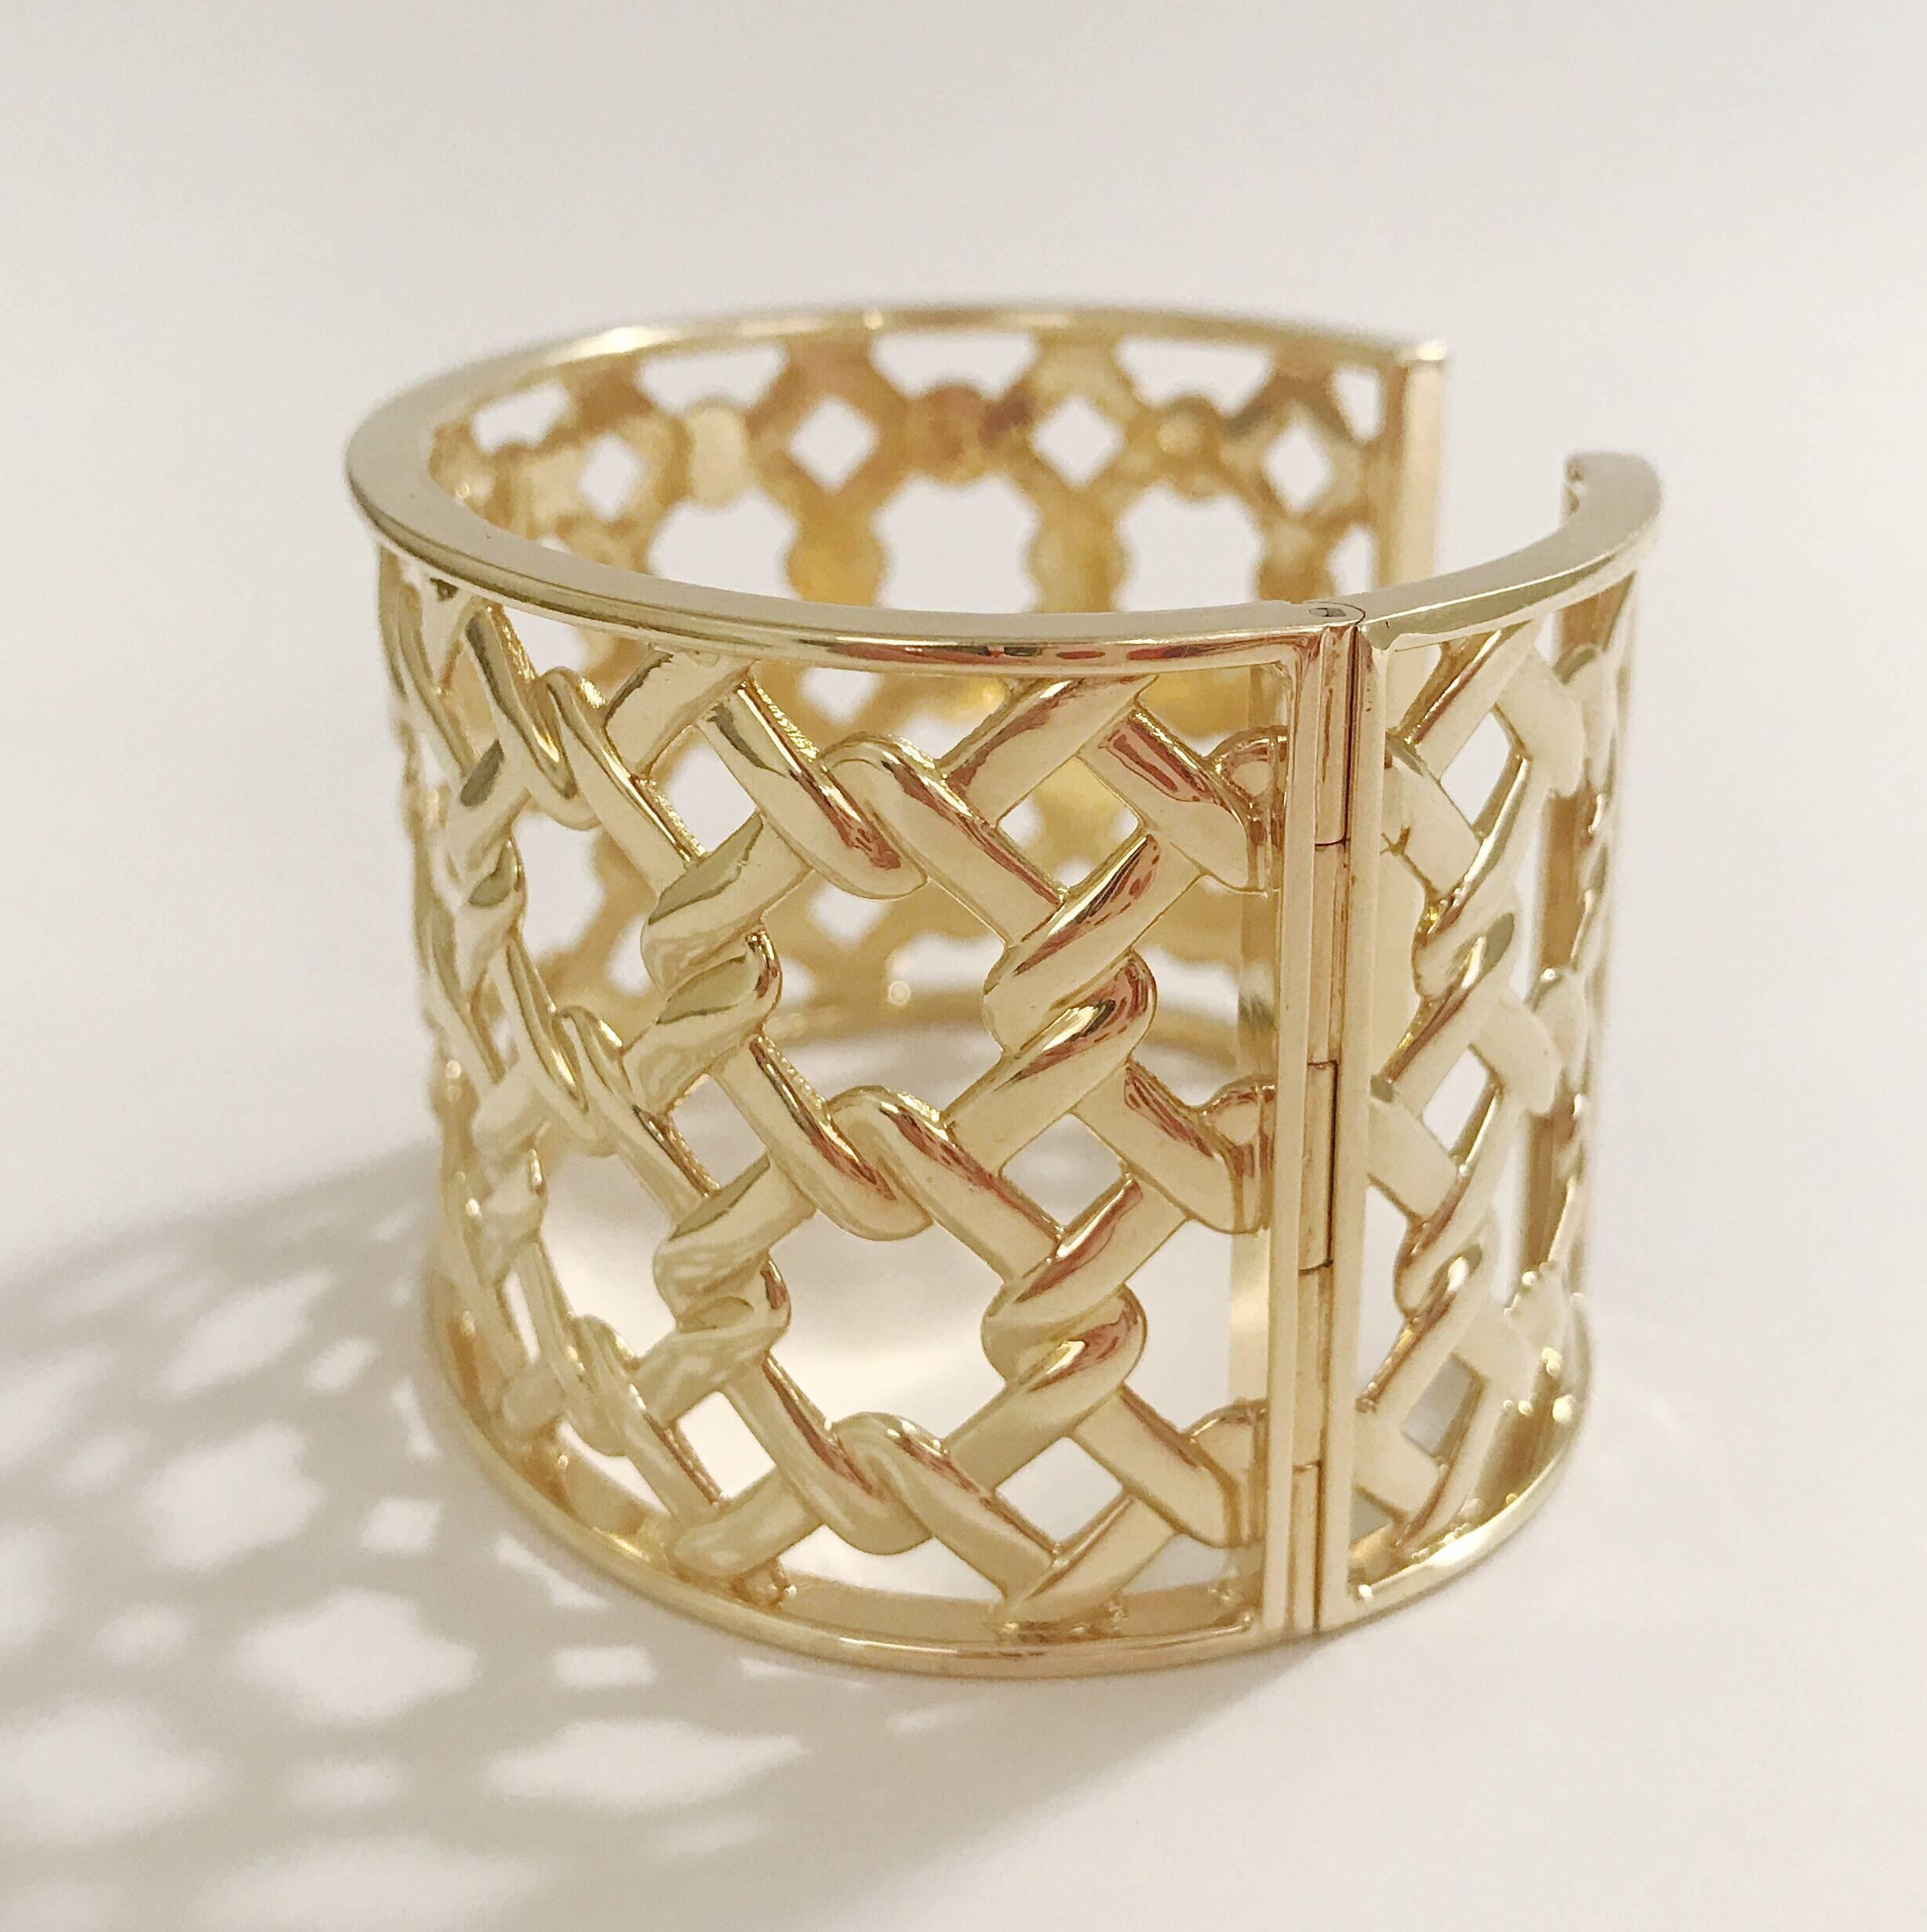 18kt Yellow Gold Basket Weave Cuff is made with an adjustable hinge to make it easier to take on and off. 

This cuff can be made in Rose, White, or Yellow Gold. In addition diamonds can be added for more detail. 

Please contact us with any